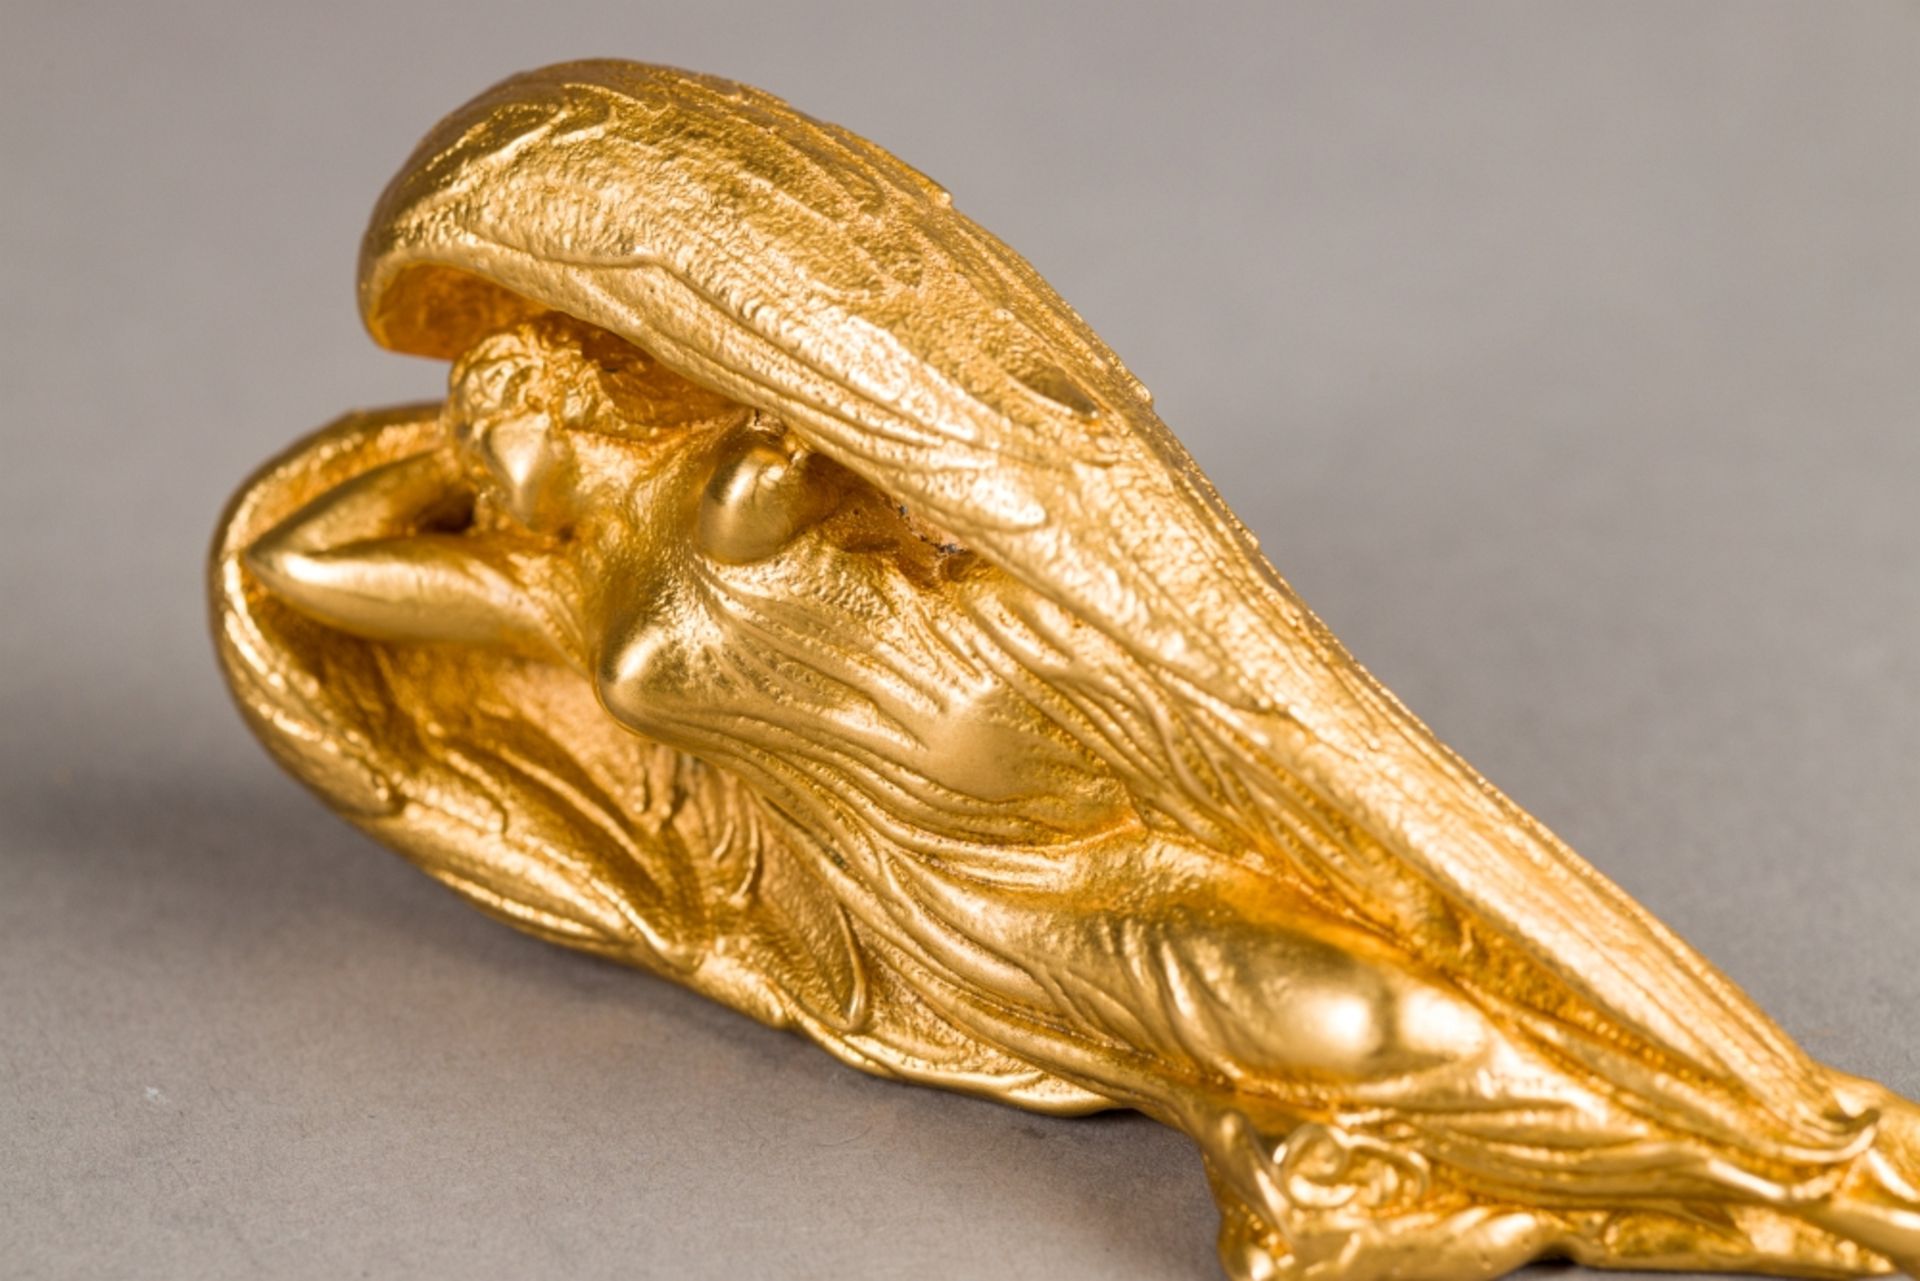 Fuchs, Ernst (1930 - 2015) Guardian Angel, 2013 Gold-plated Metal Casting made of Tin Alloy Signed - Image 2 of 5